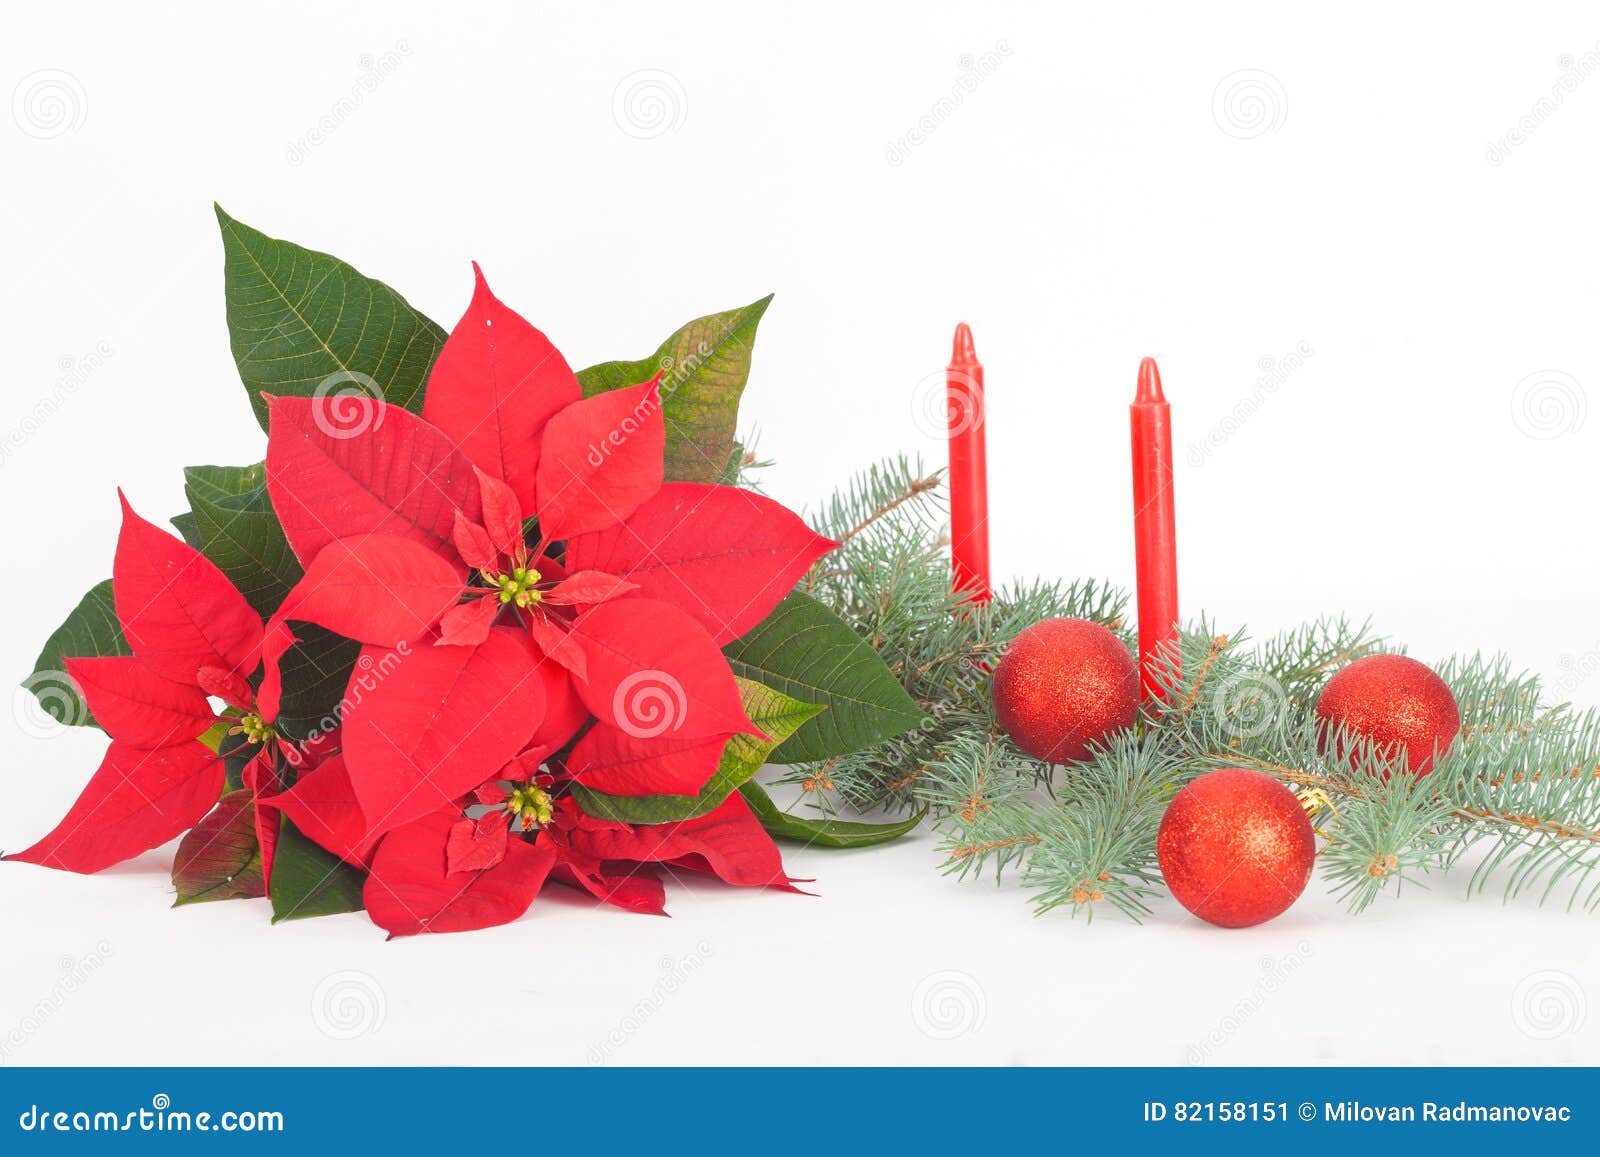 Christmas Flowers with Red Decoration Balls and Candles Stock Image ...